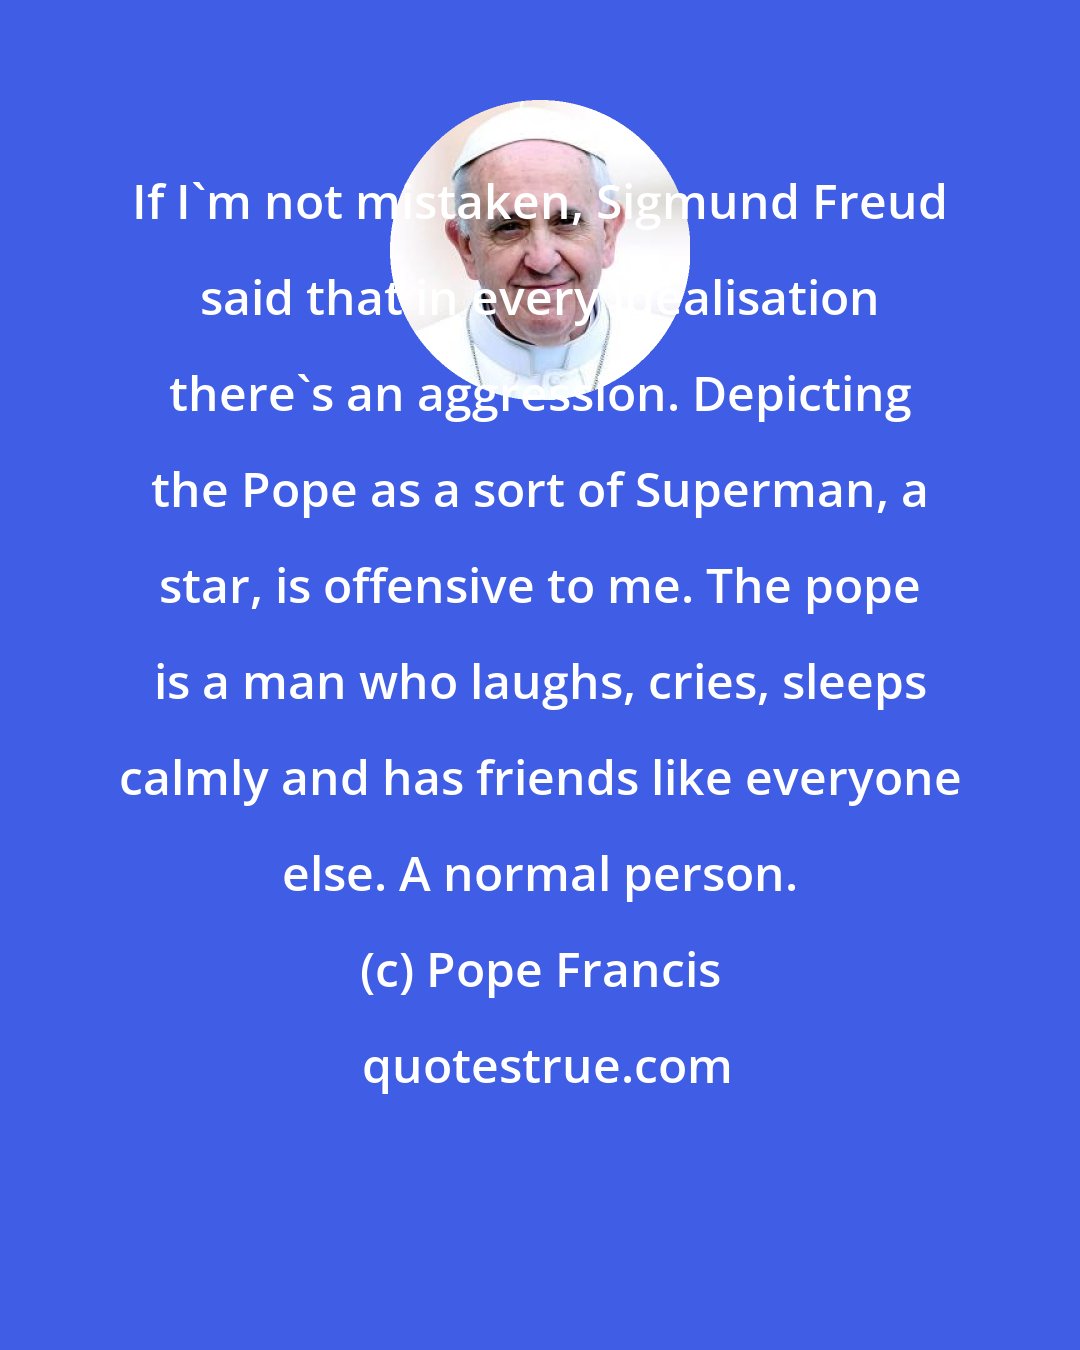 Pope Francis: If I'm not mistaken, Sigmund Freud said that in every idealisation there's an aggression. Depicting the Pope as a sort of Superman, a star, is offensive to me. The pope is a man who laughs, cries, sleeps calmly and has friends like everyone else. A normal person.